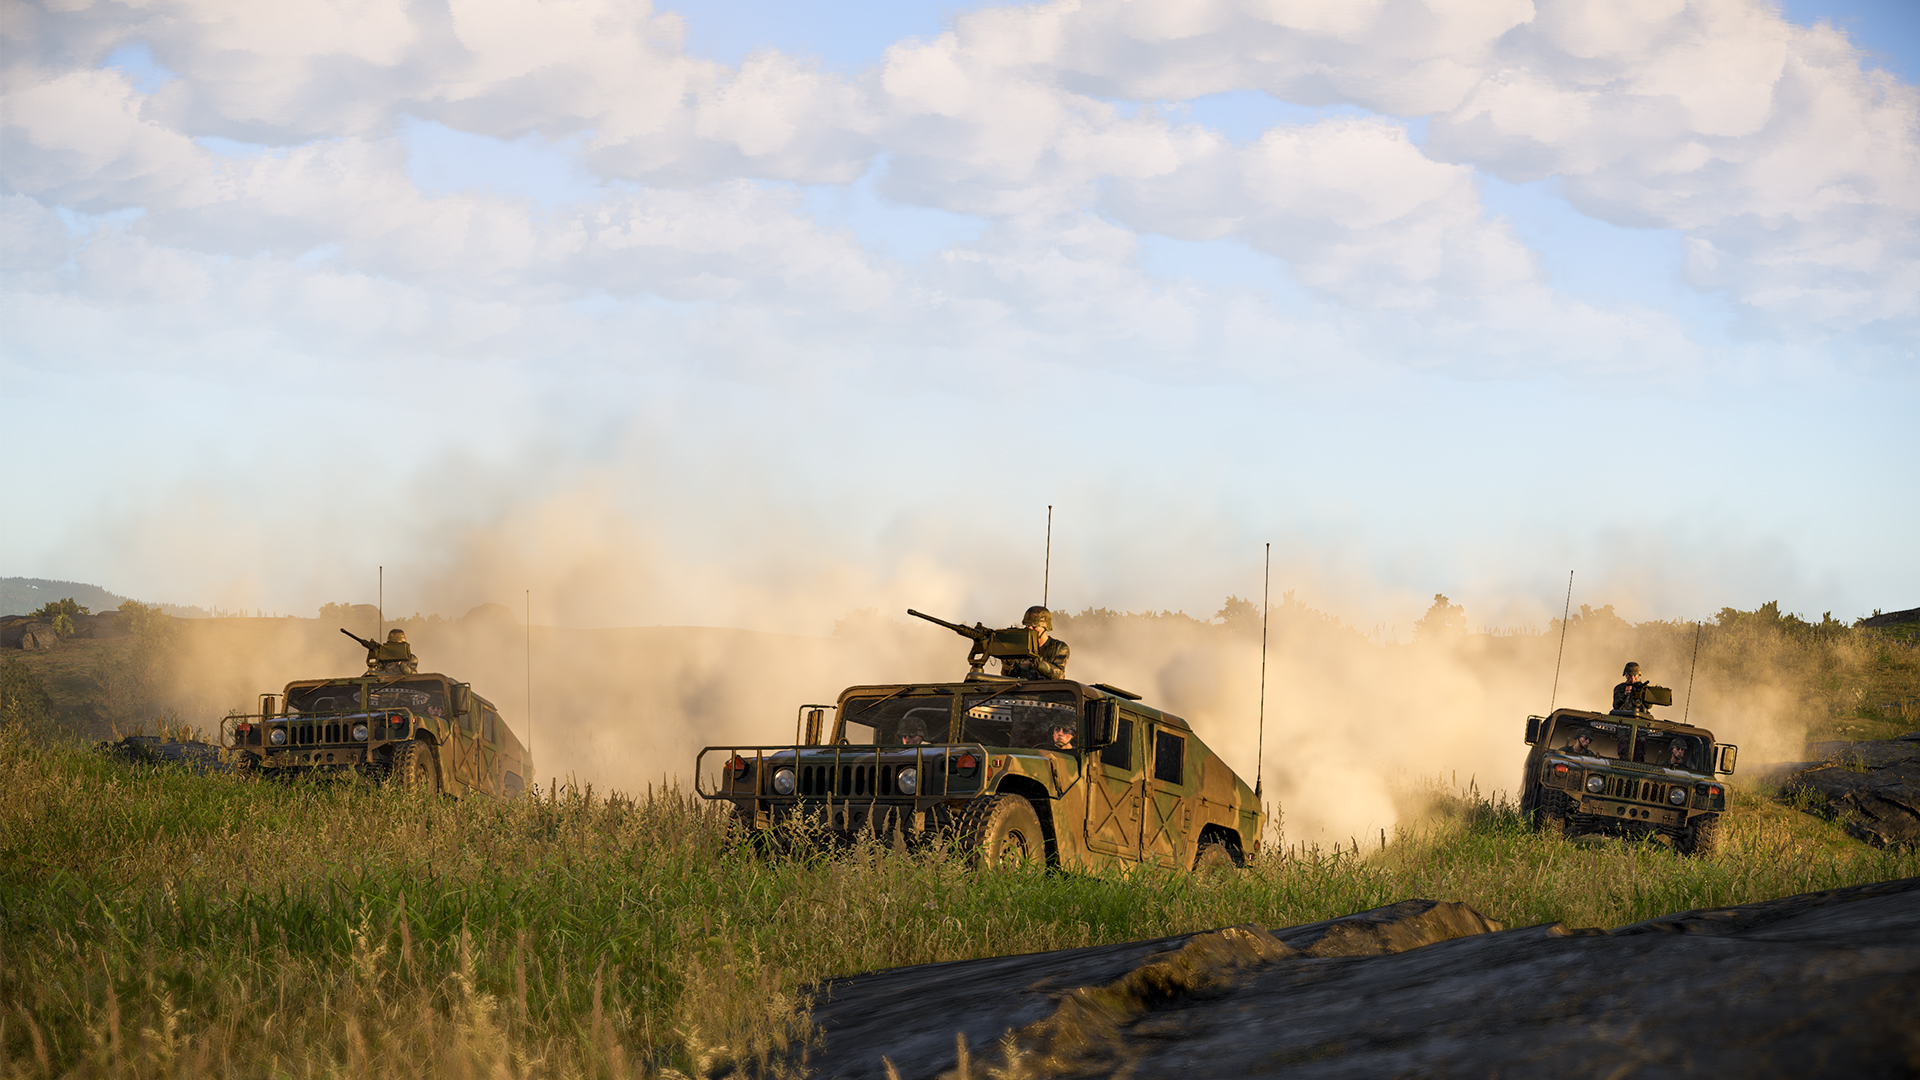 Arma 4 announced, new ‘preview’ game Arma Reforger out now